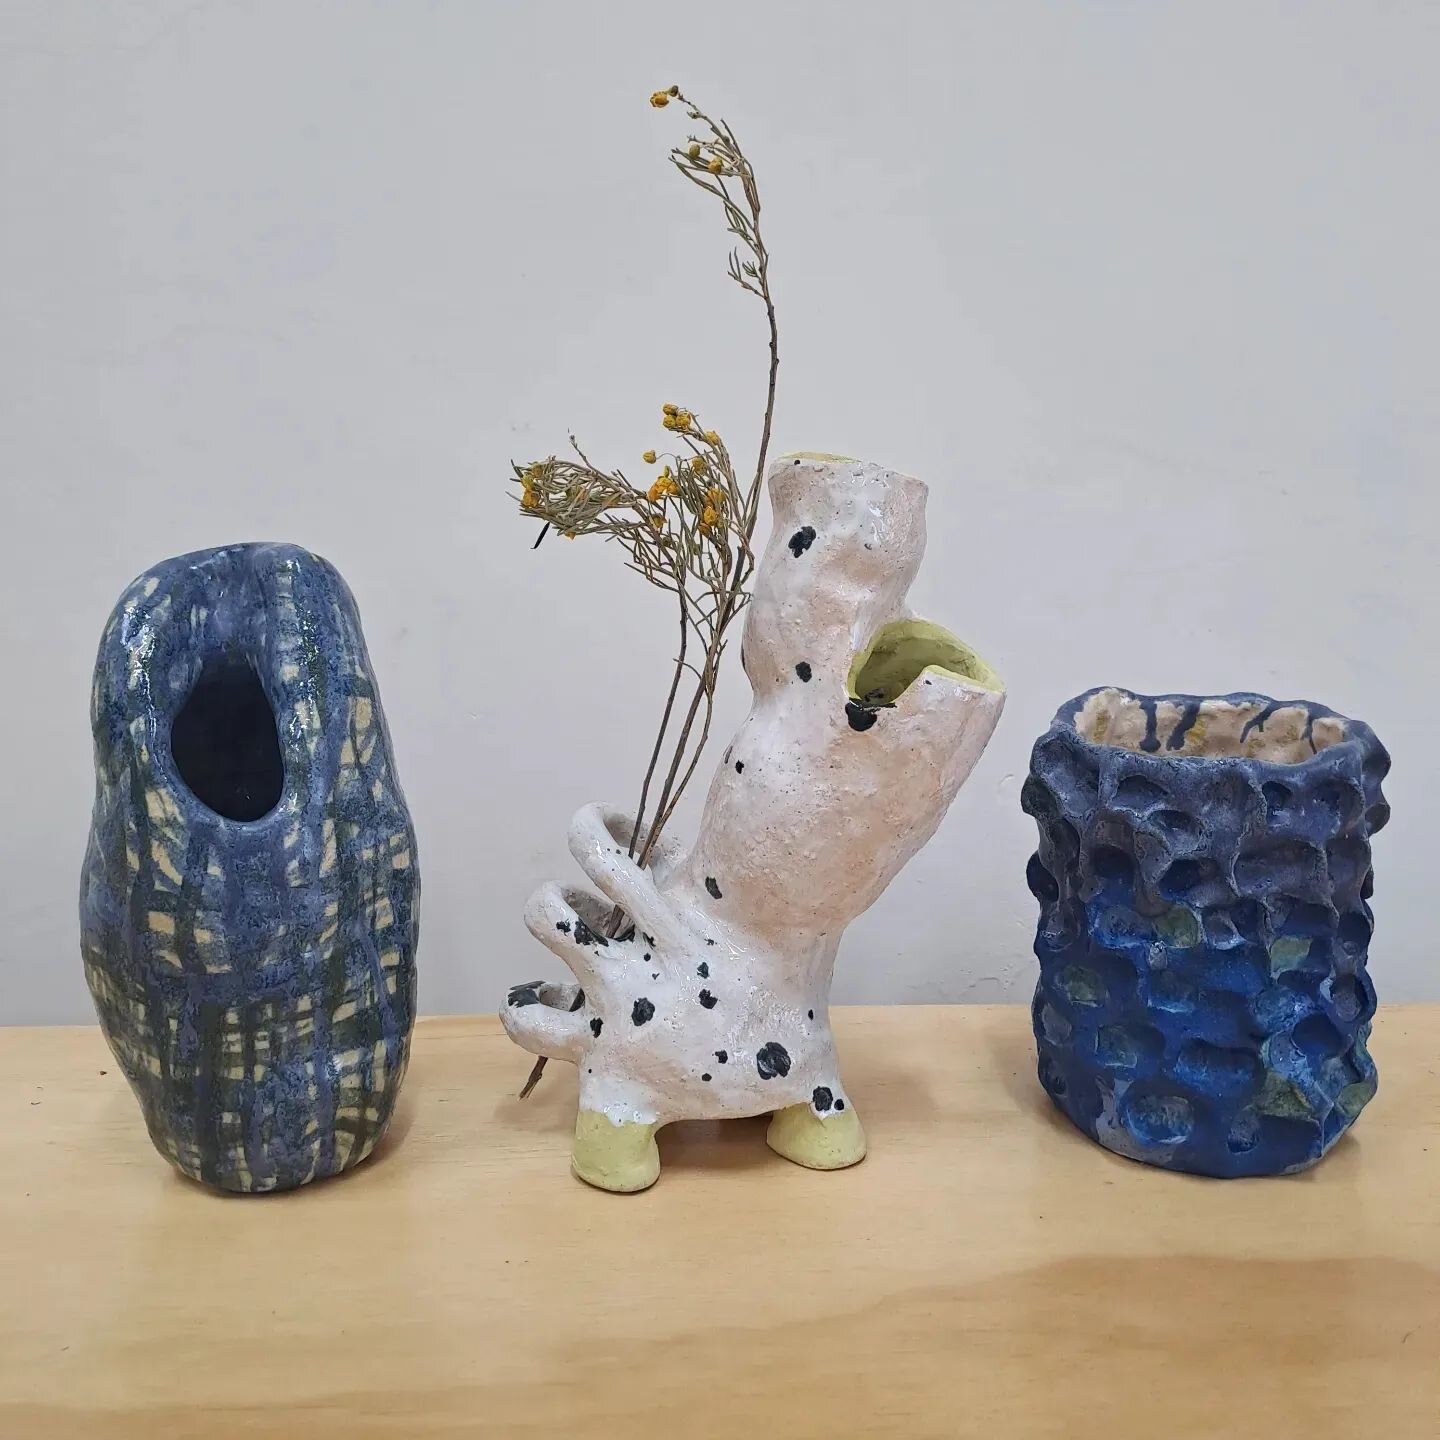 Some delicious things from the kiln recently 

#pottery #glazefiring #stoneware #blue #ceramicsart #nswartist #australianpottery